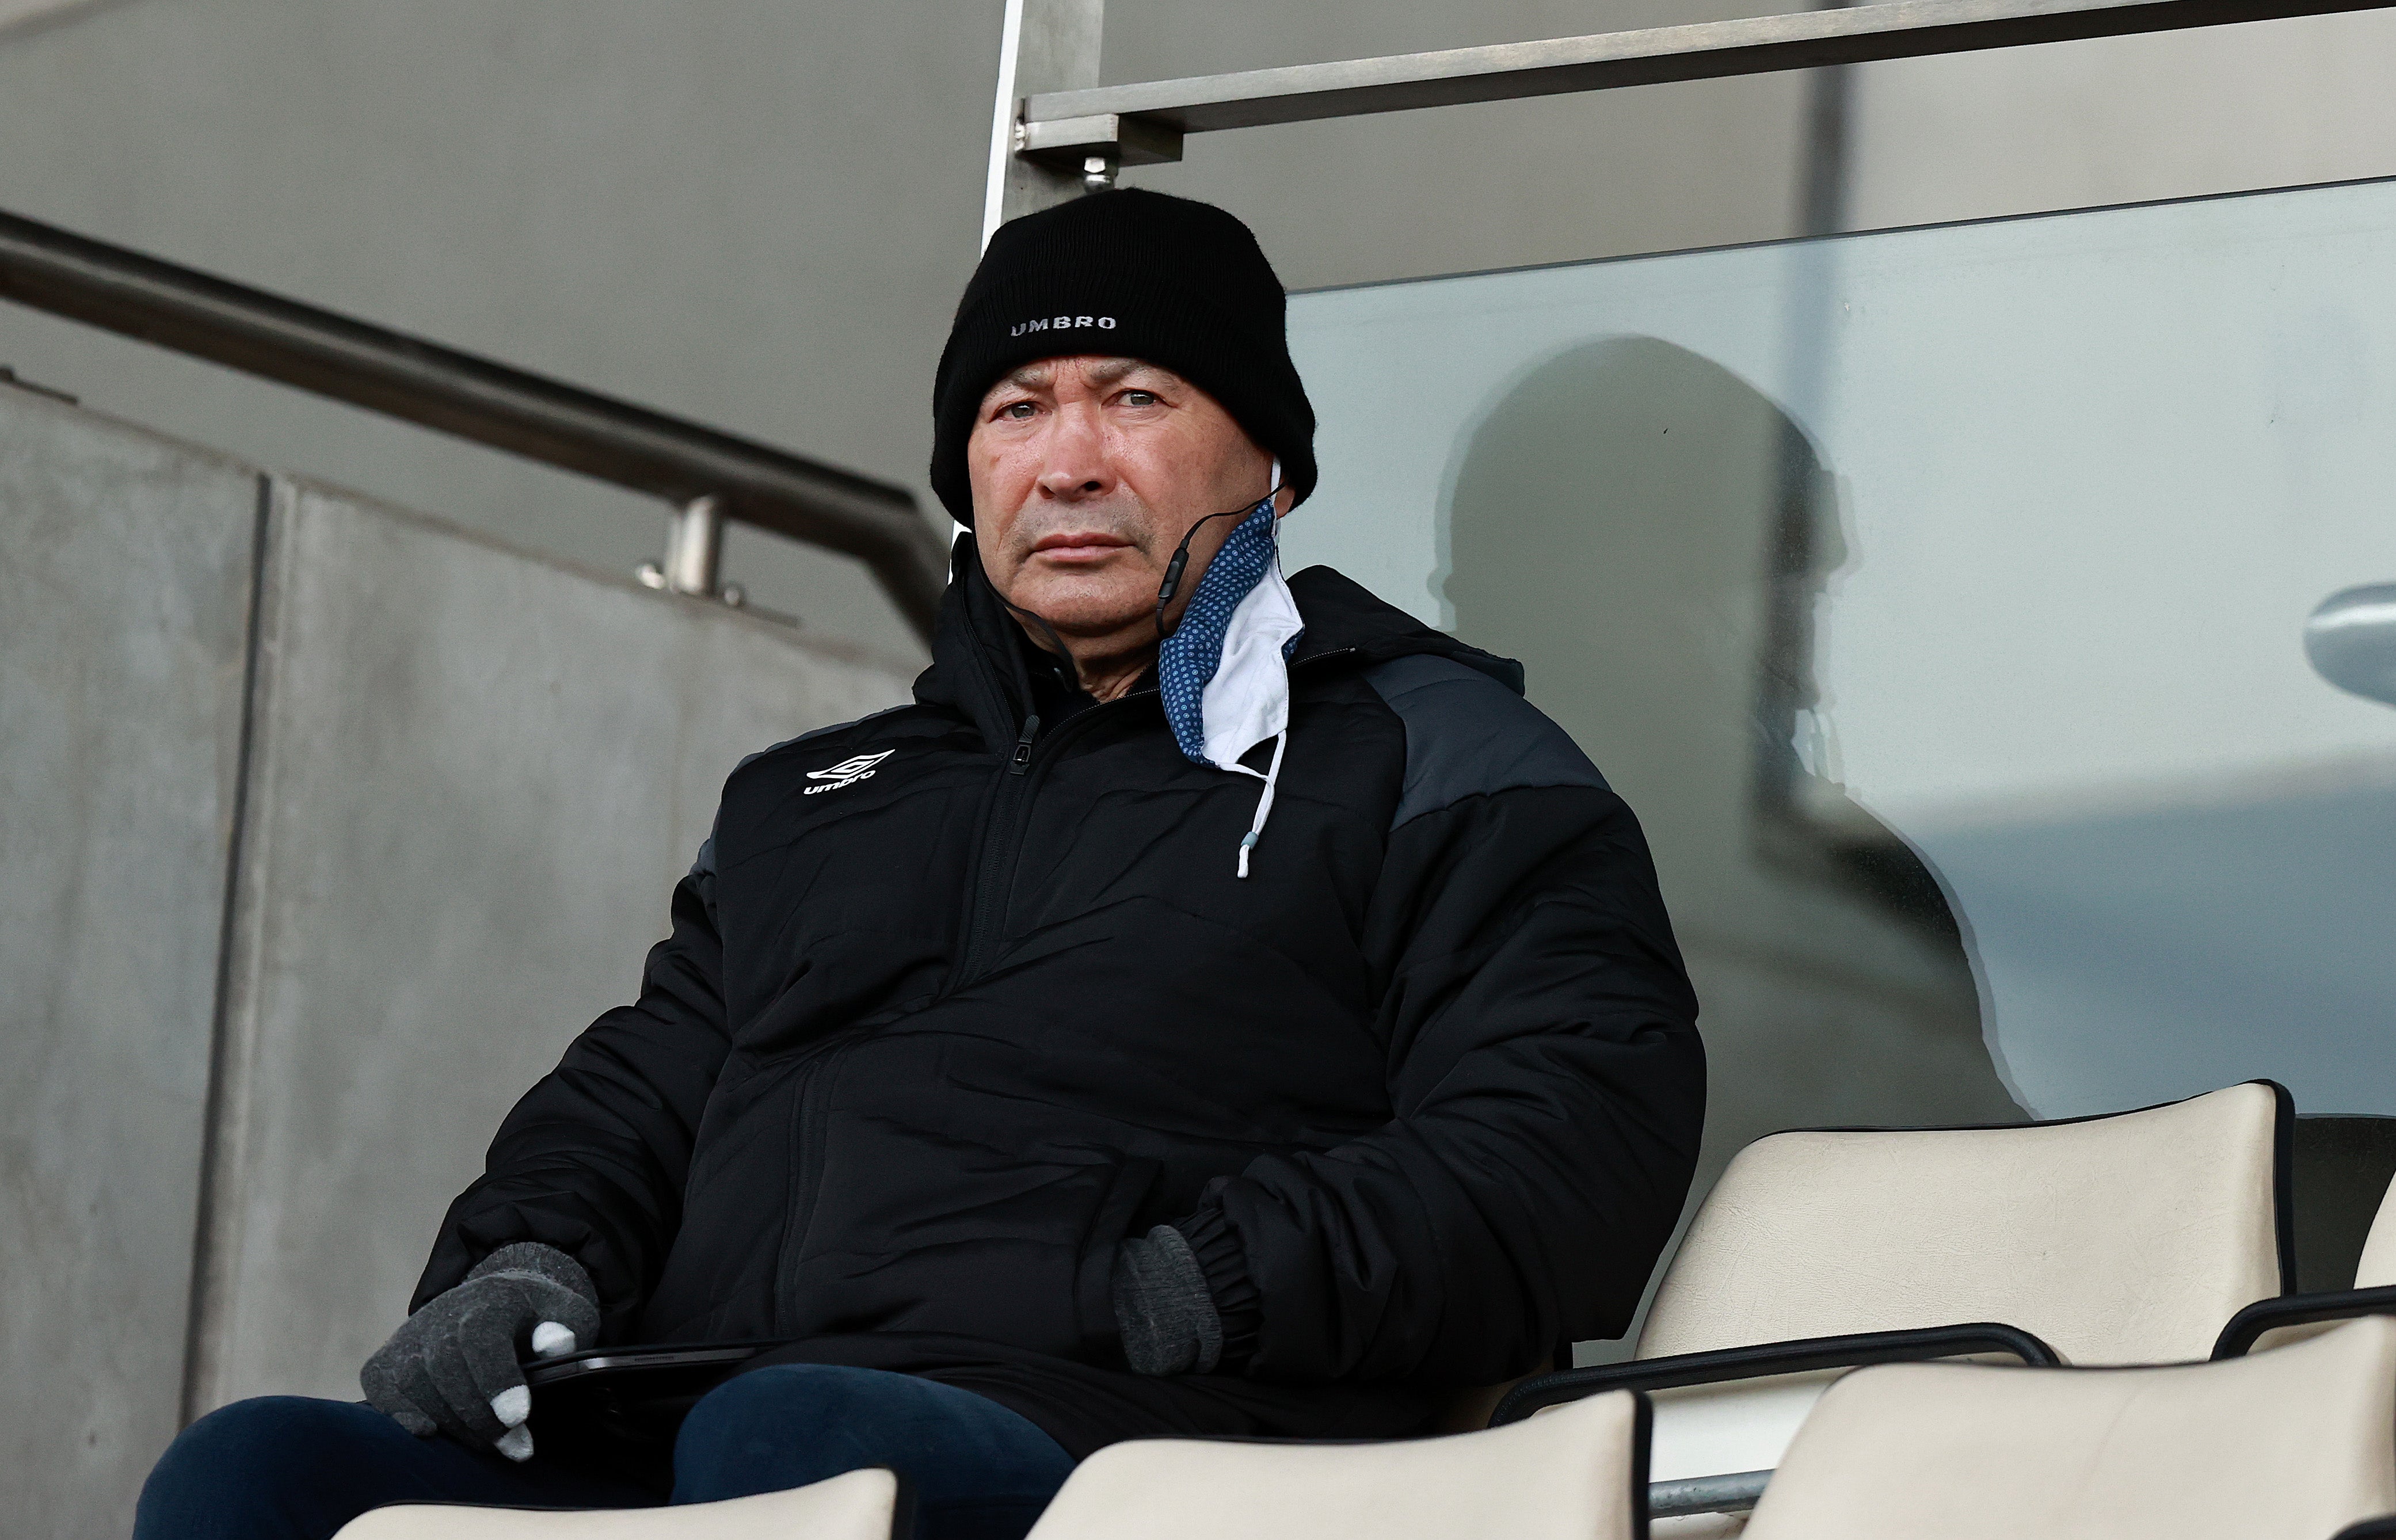 Eddie Jones, the England head coach looks on during the Gallagher Premiership Rugby match between Leicester Tigers and Newcastle Falcons